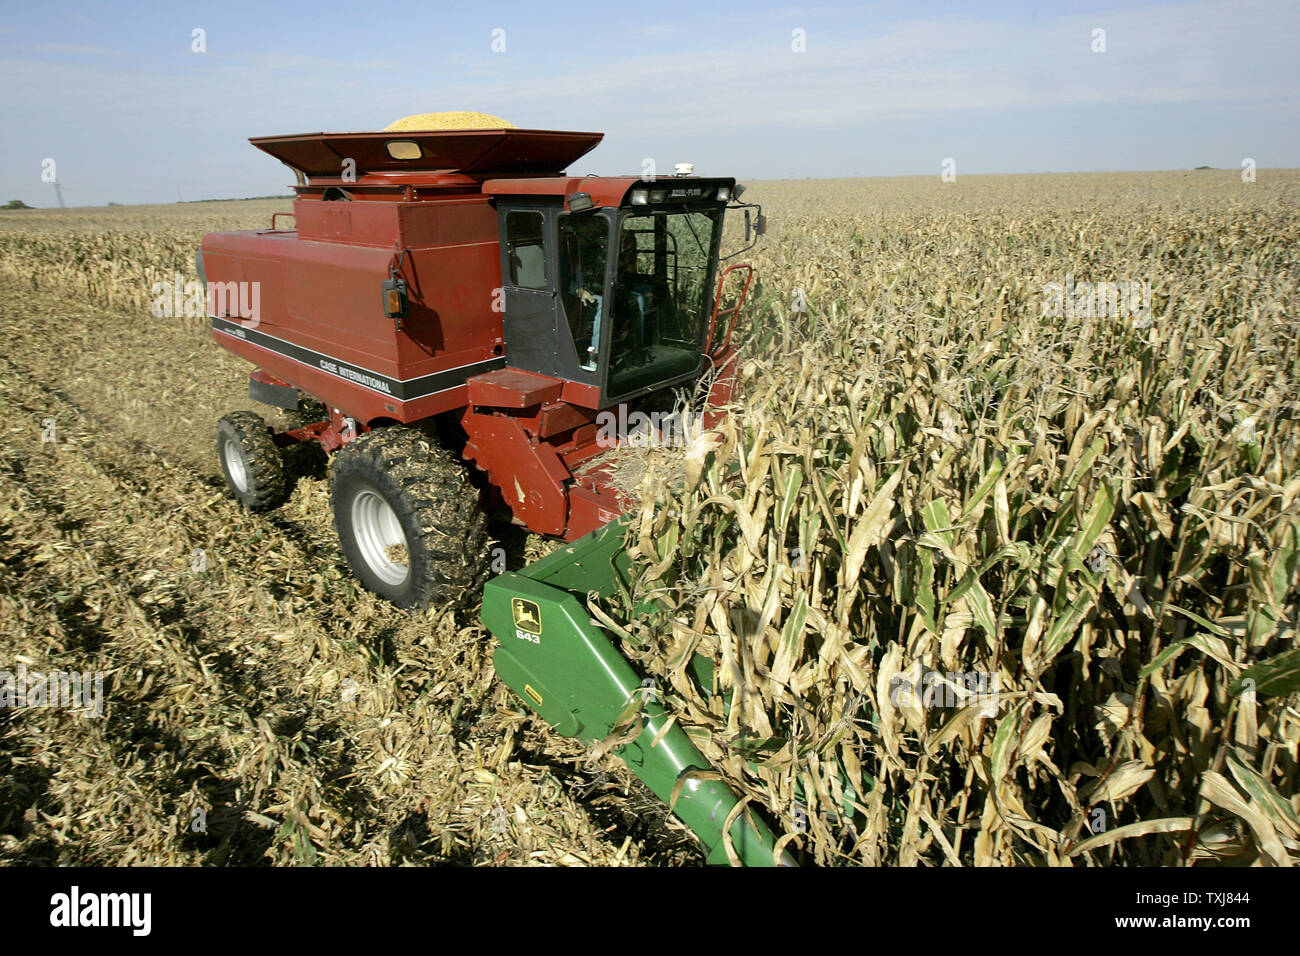 Brad Weber harvests corn on land he rents near Manteno, Illinois on October 20, 2008. Weber farms 450 acres part-time but hopes to acquire more land so that he can be a full-time farmer. Corn for December delivery rose $0.155 per bushel at the Chicago Board of Trade closing at $4.185 Monday as rebounding oil markets shift investor focus to commodities. (UPI Photo/Brian Kersey) Stock Photo